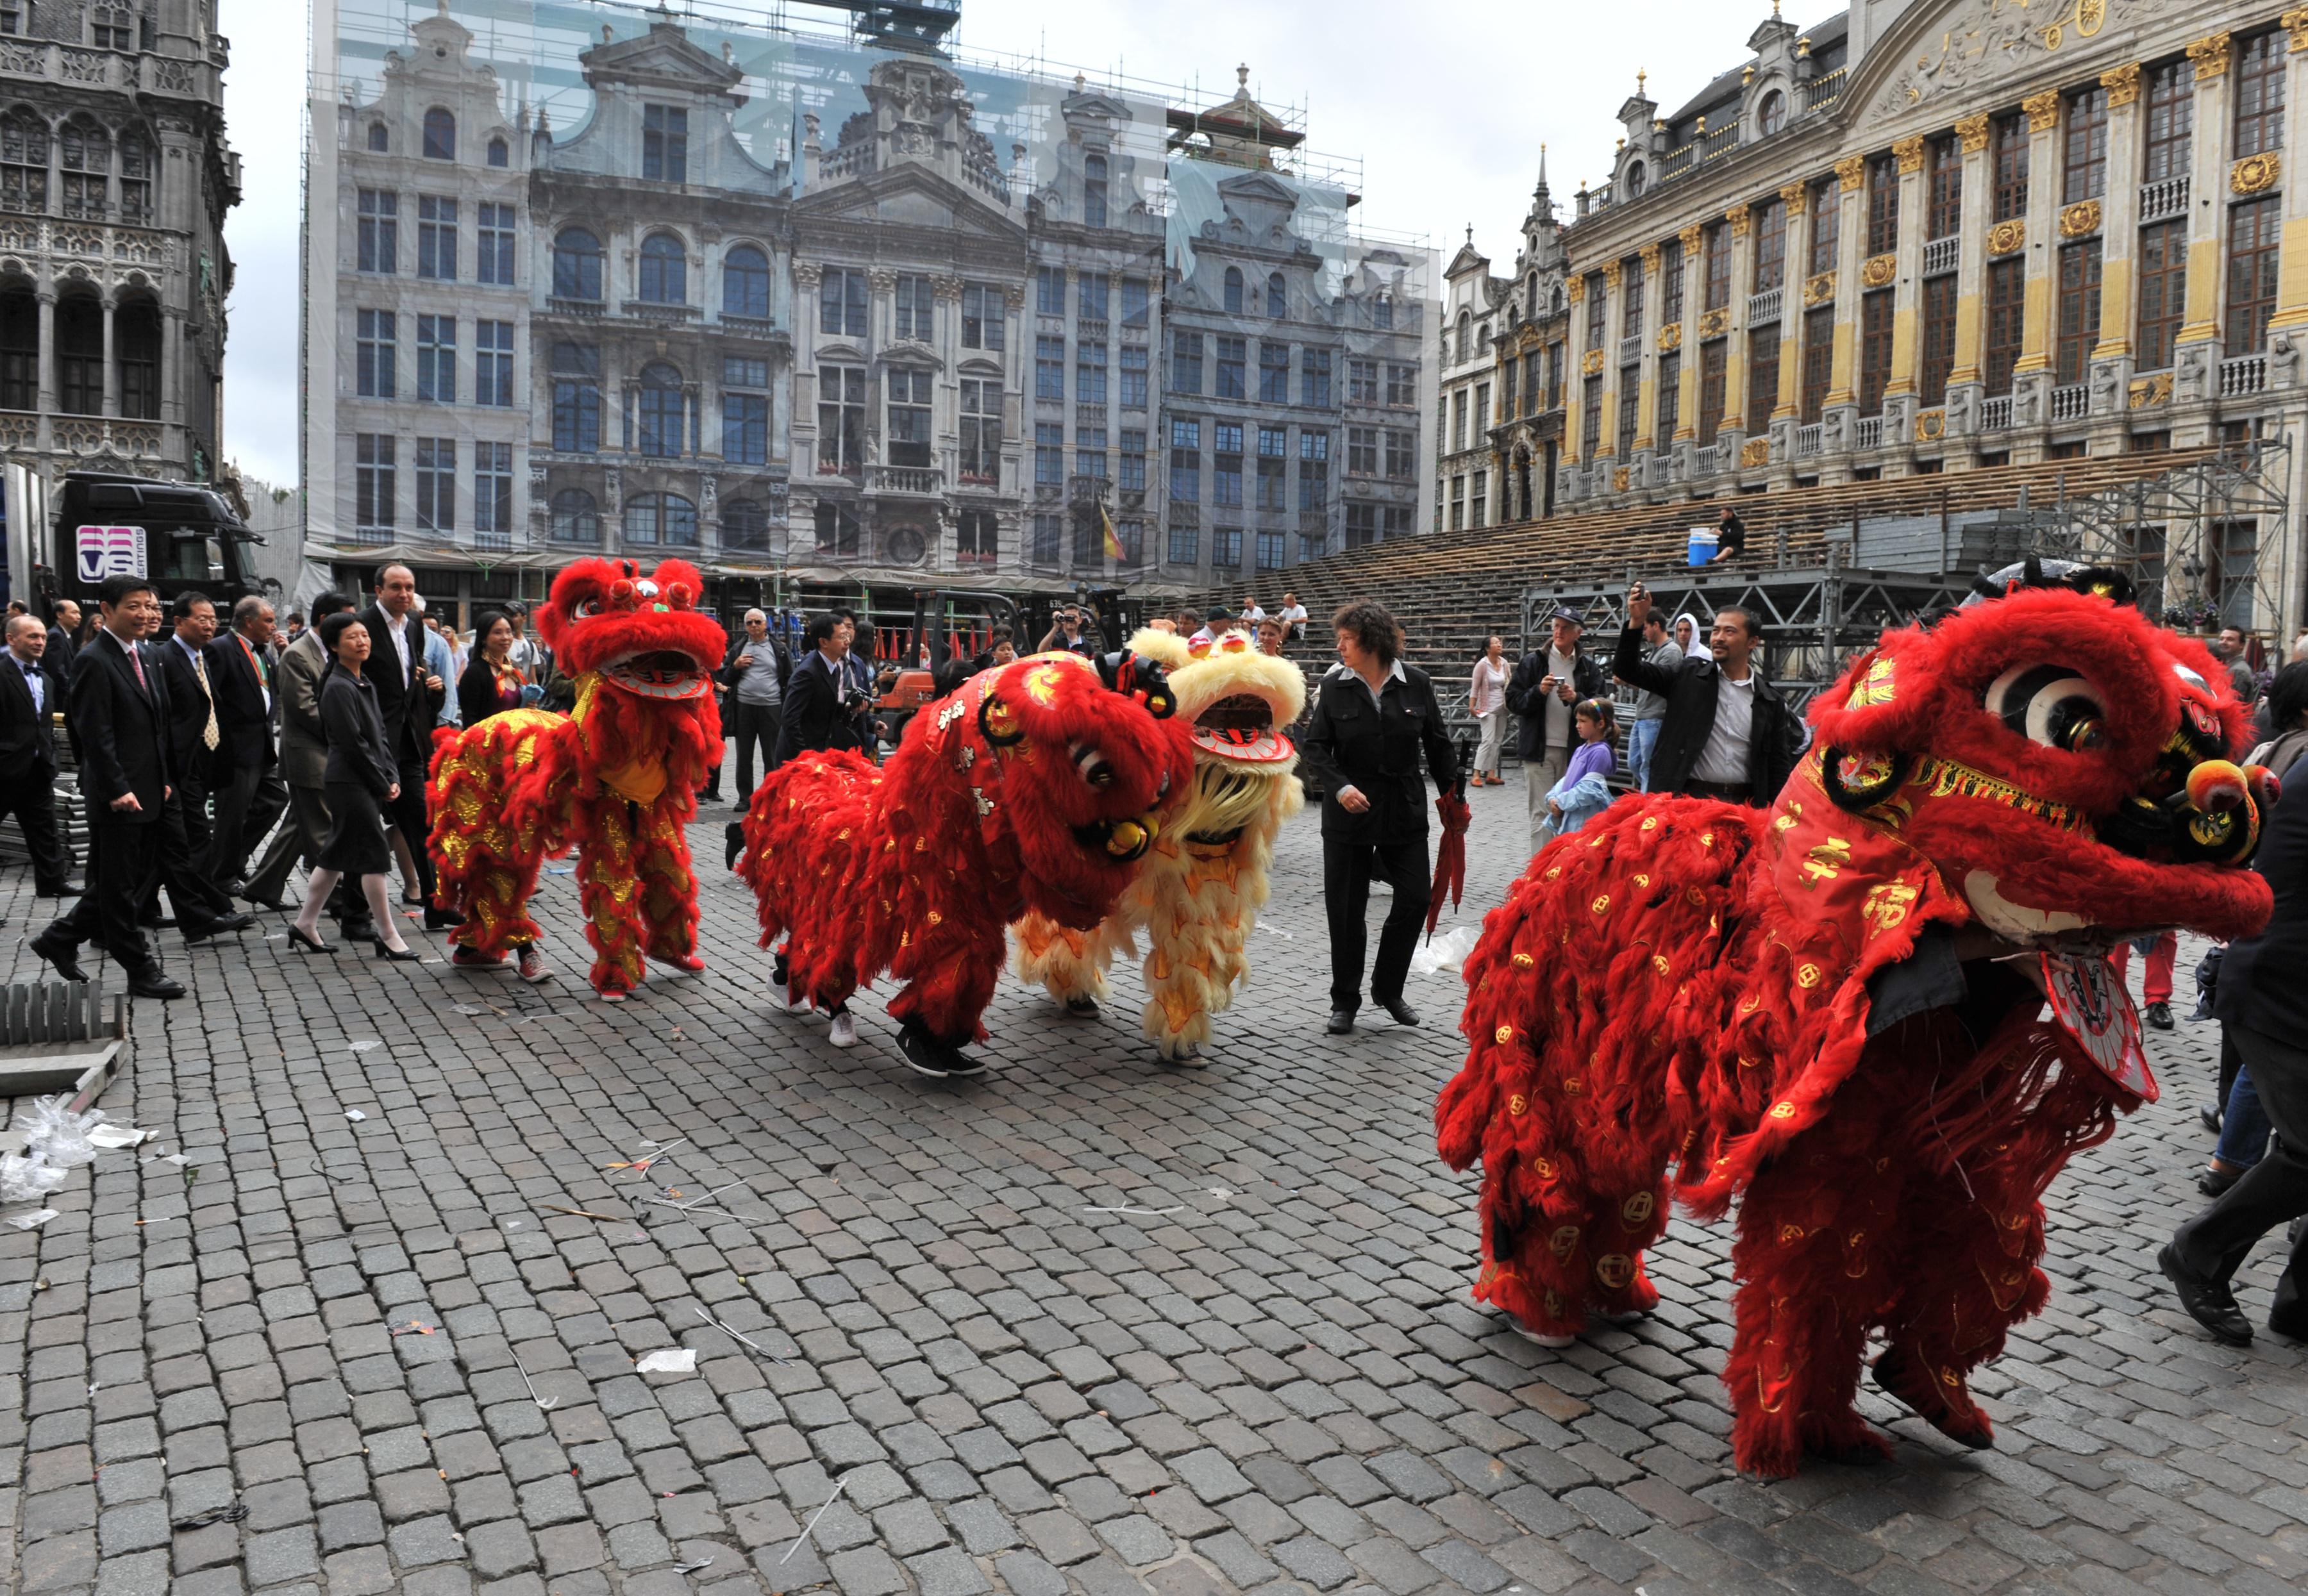 Chinese lions open the way on July 6, 2012, on the Grand Place in Brussels, to Belgian and Chinese personalities, heading to attend a ceremony at the nearby famous Manneken-Pis fountain.